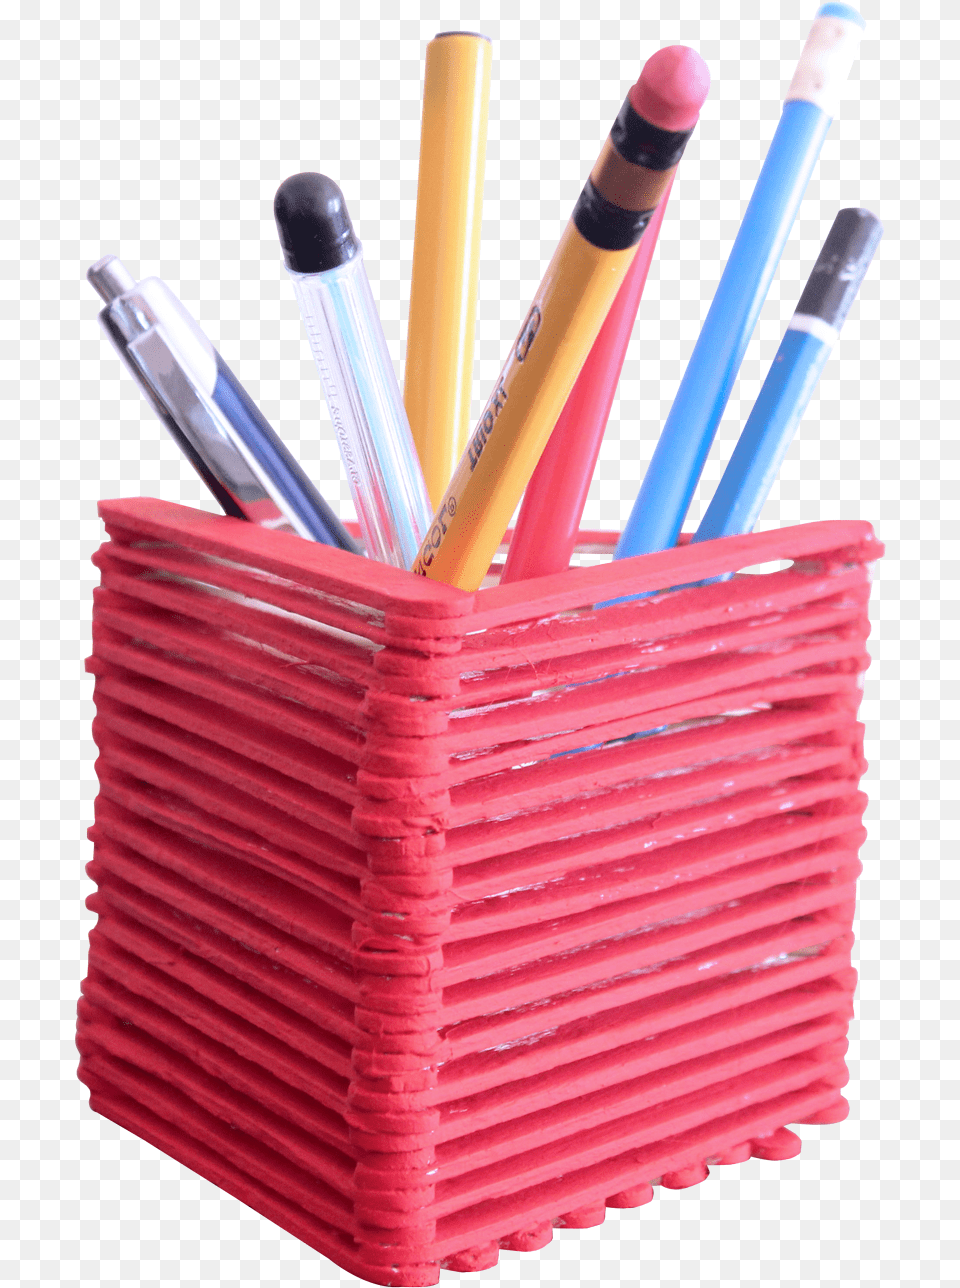 Pen Stand Transparent Image Pen Stand In, Cosmetics, Lipstick, Basket, Dynamite Free Png Download